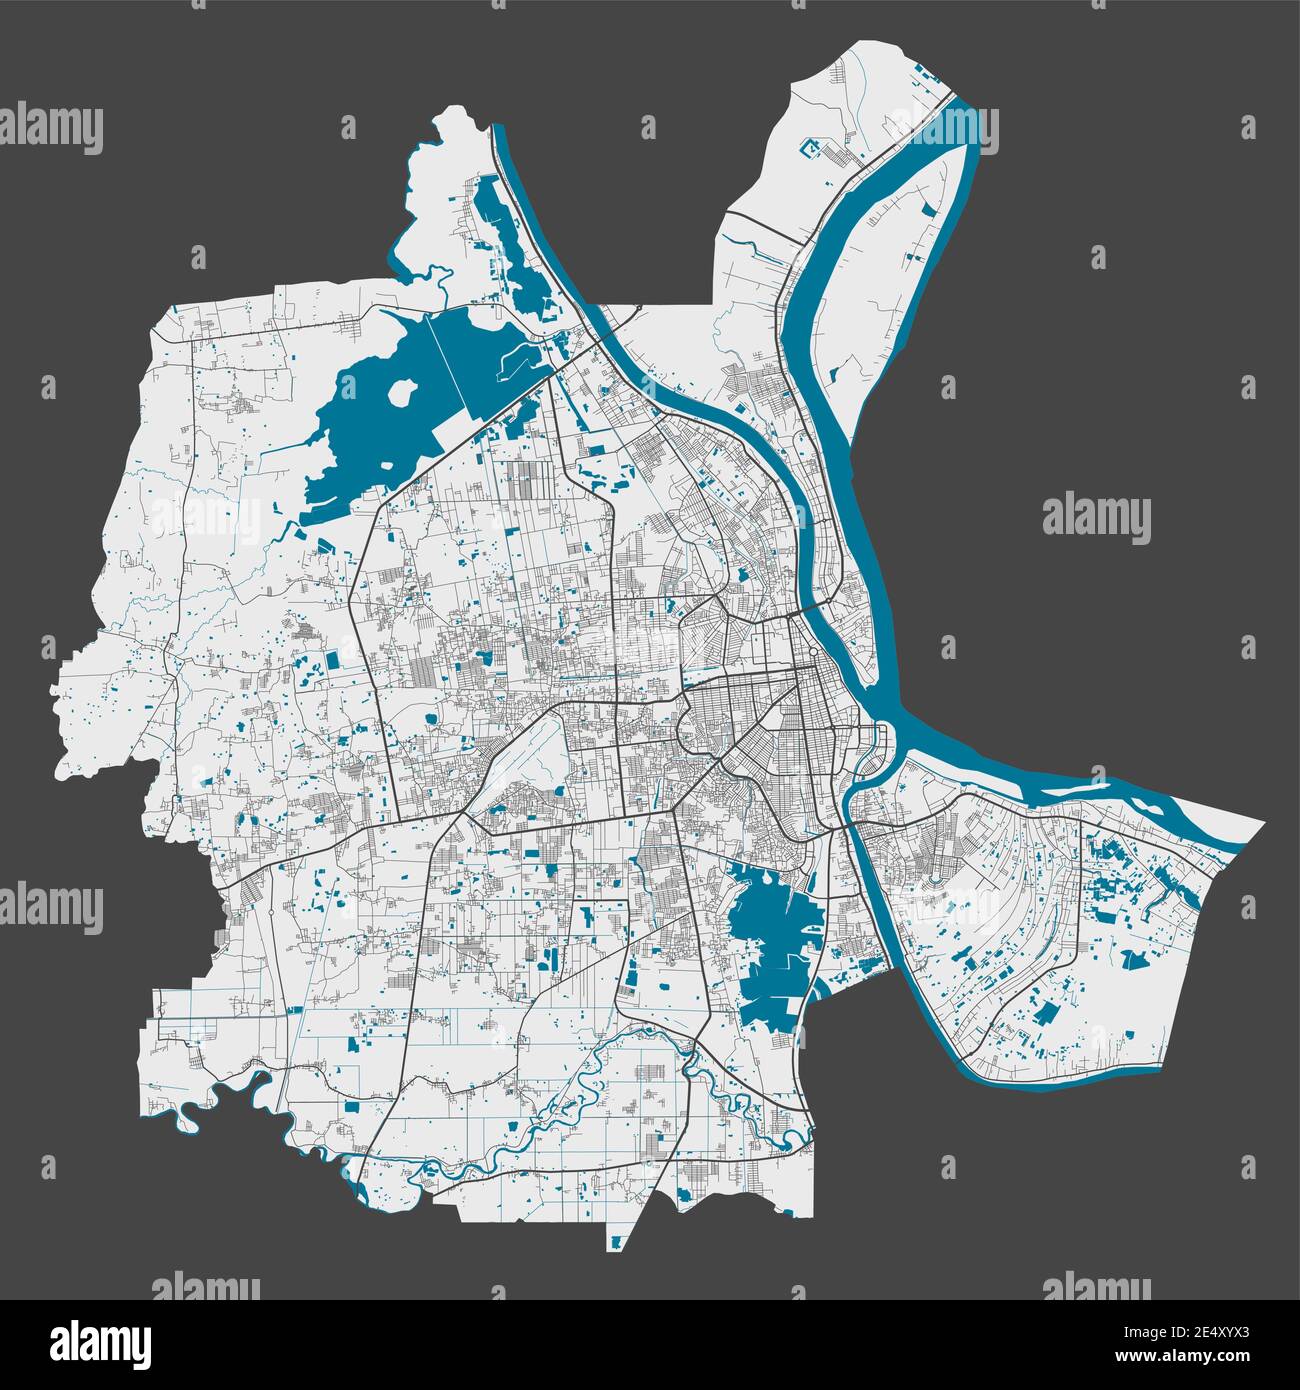 Phnom Penh Map Detailed Map Of Phnom Penh City Administrative Area Cityscape Panorama Royalty Free Vector Illustration Outline Map With Highways 2E4XYX3 